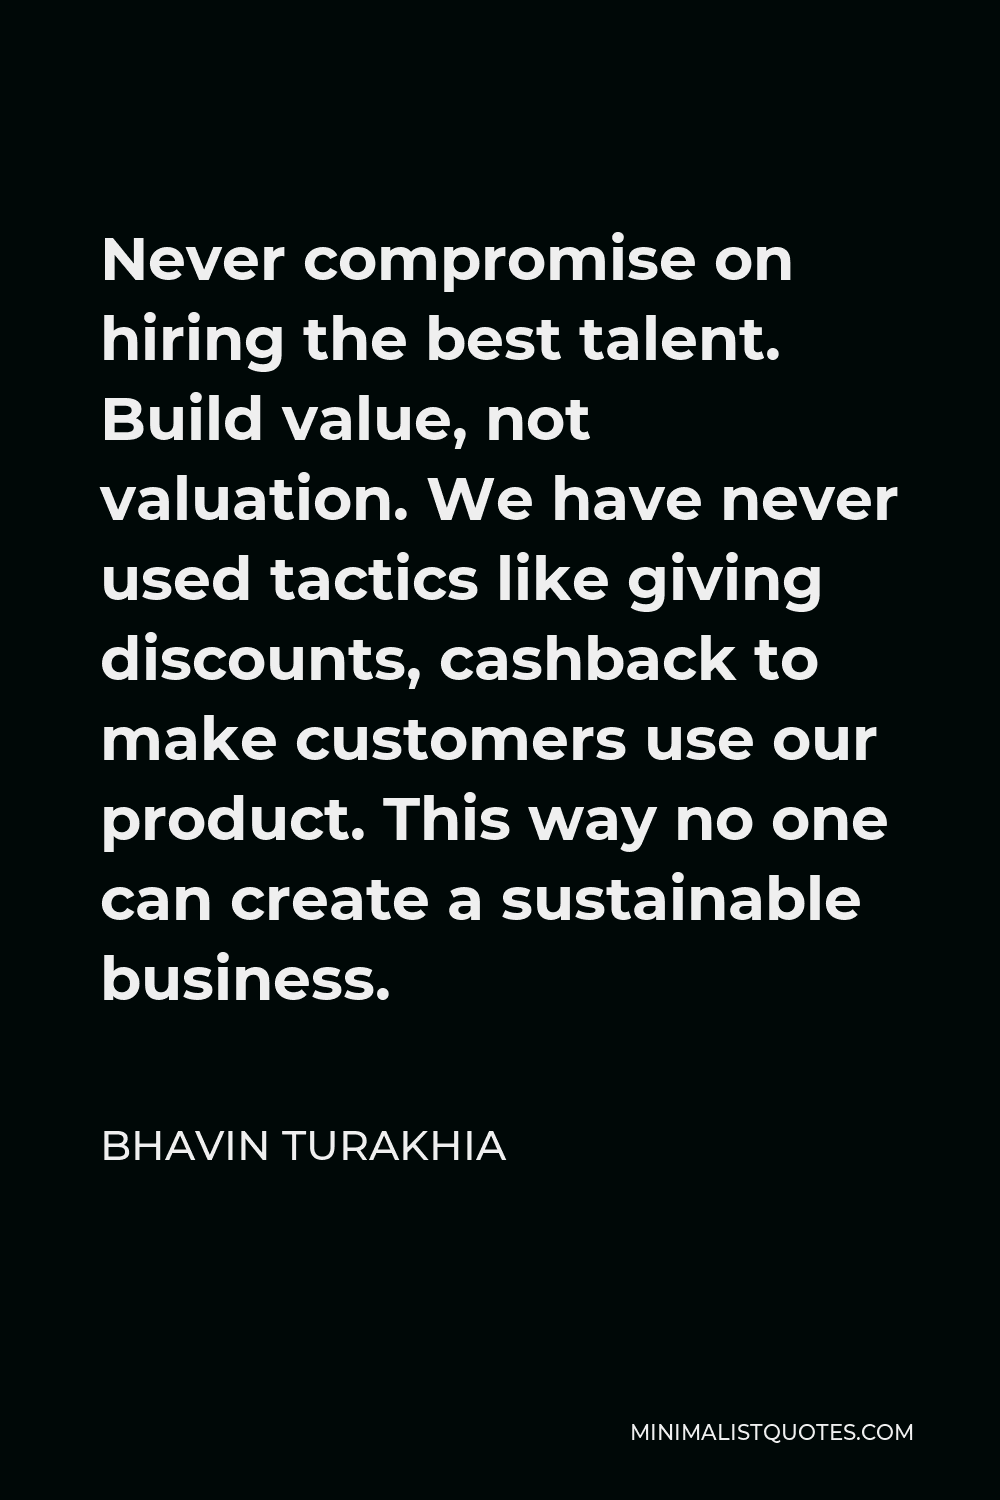 Bhavin Turakhia Quote - Never compromise on hiring the best talent. Build value, not valuation. We have never used tactics like giving discounts, cashback to make customers use our product. This way no one can create a sustainable business.